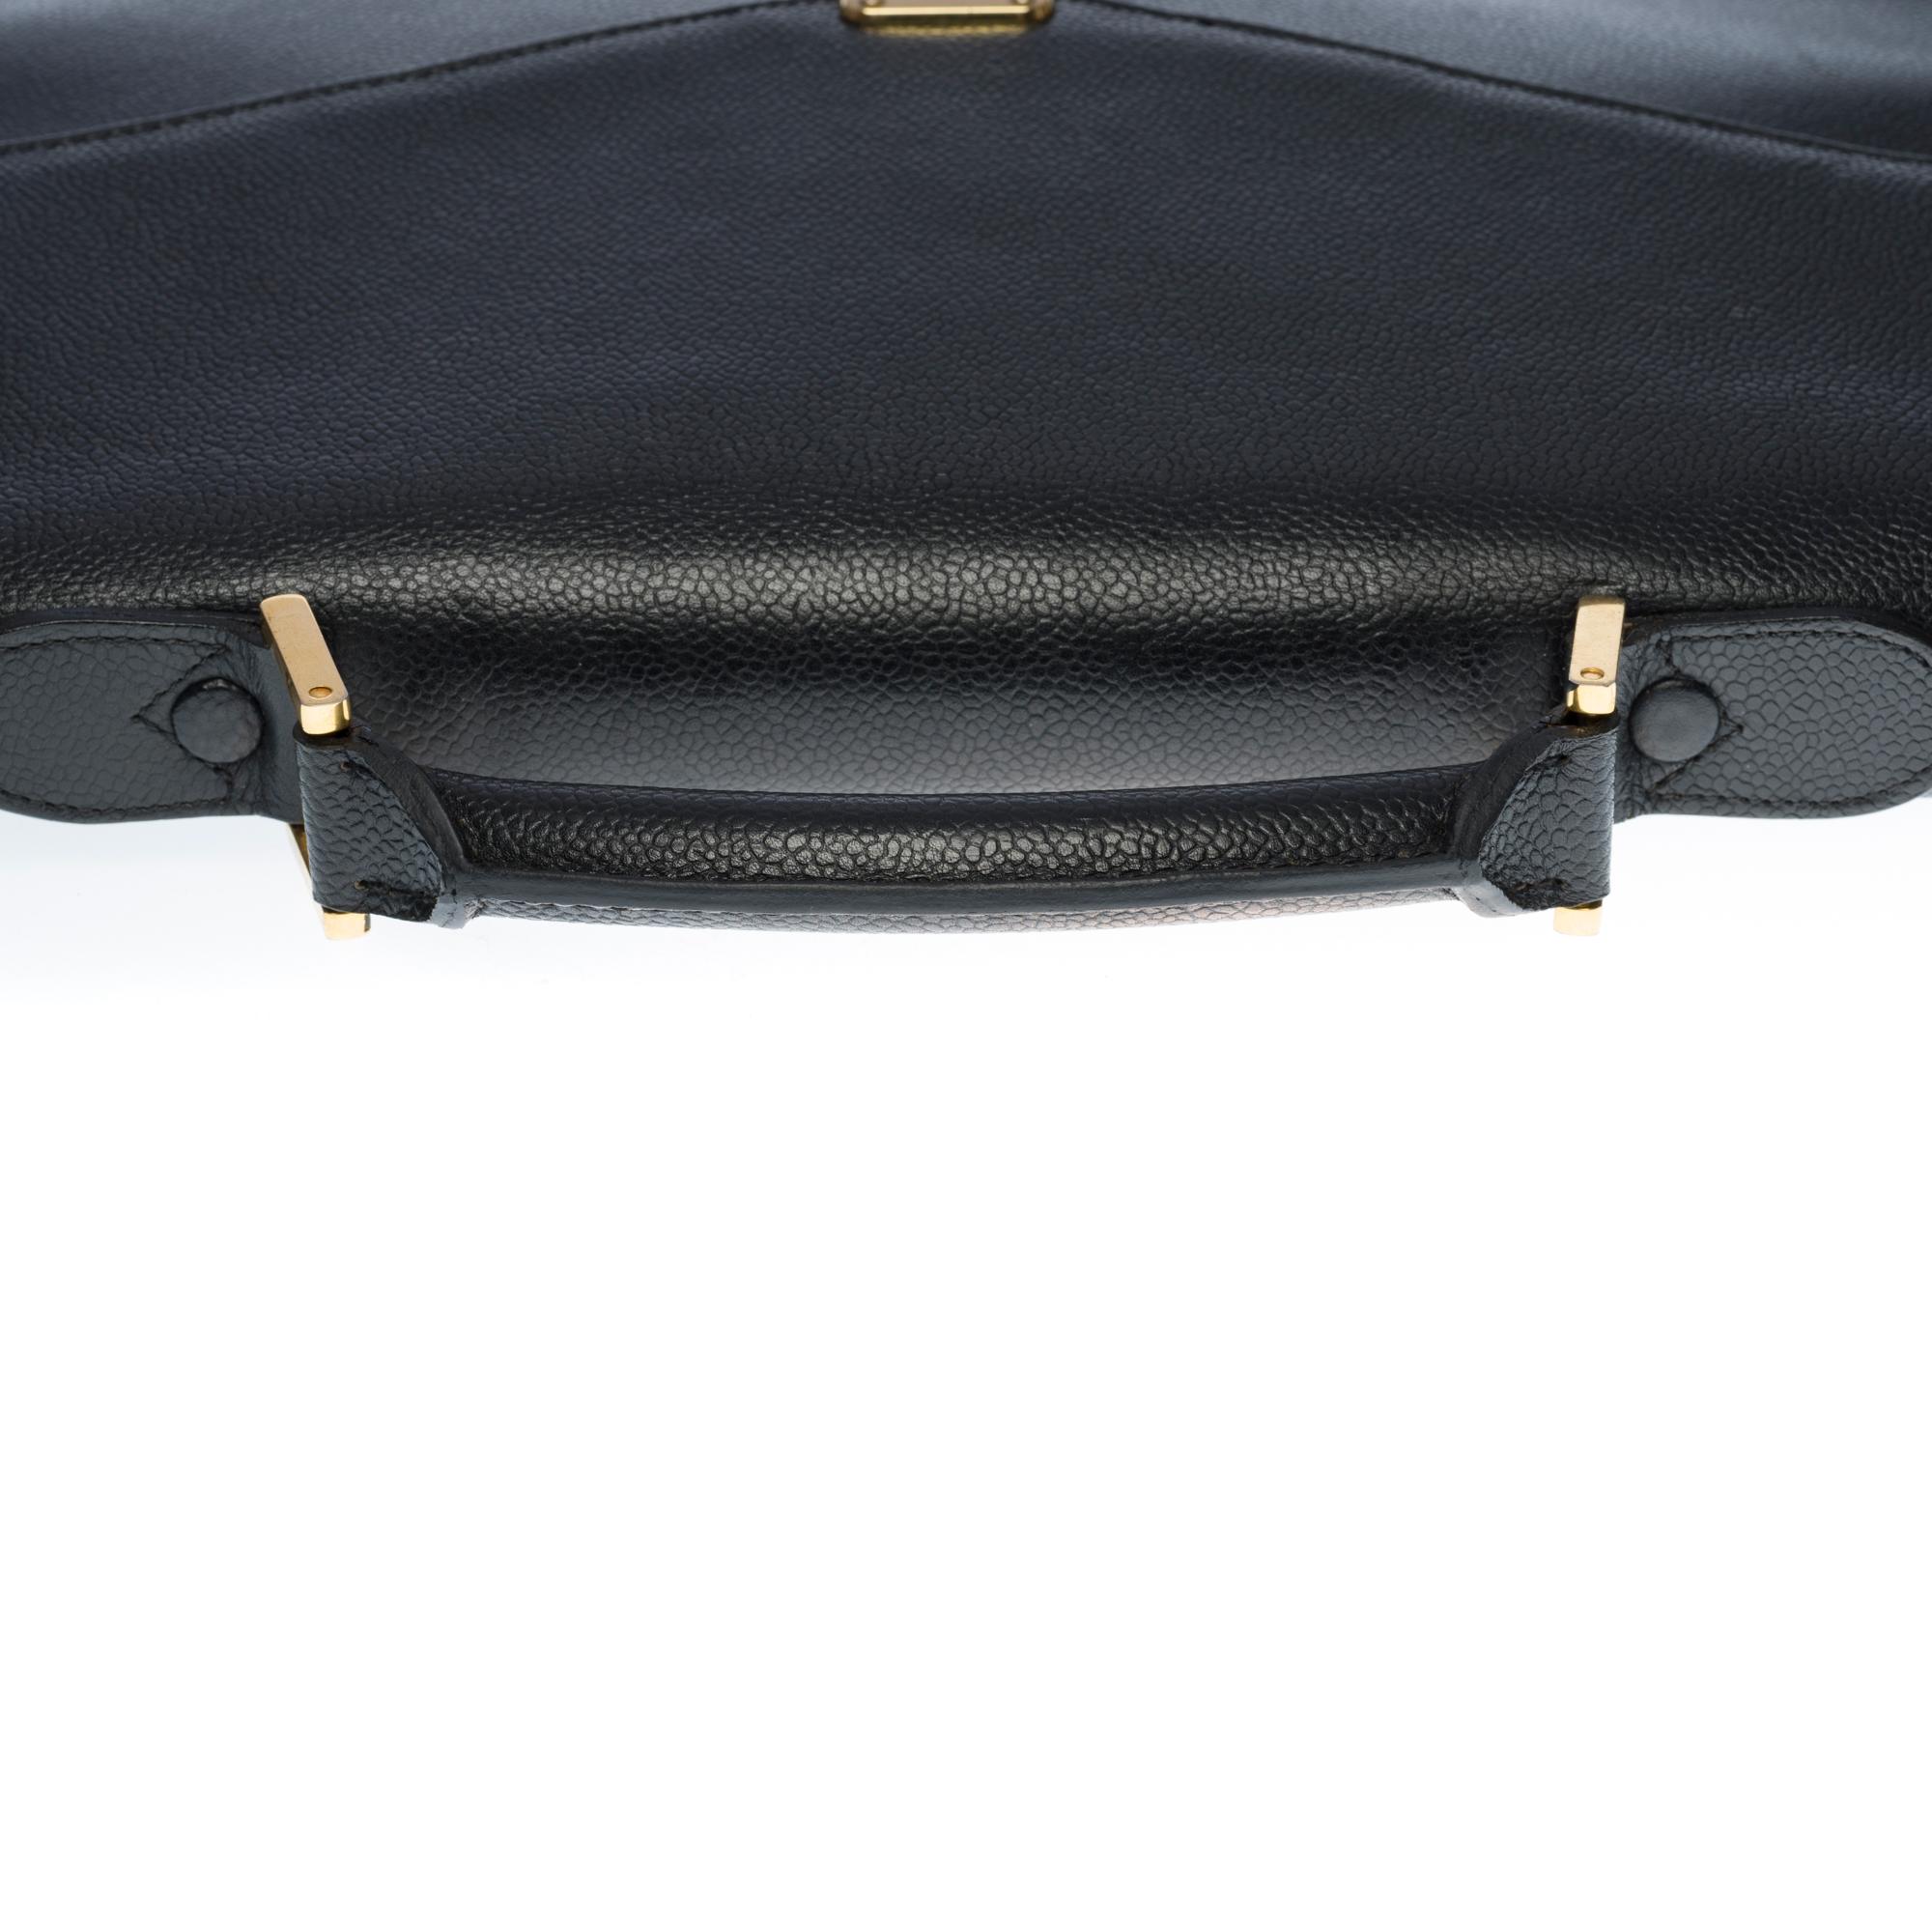 Chanel vintage Briefcase in black grained leather, GHW 2